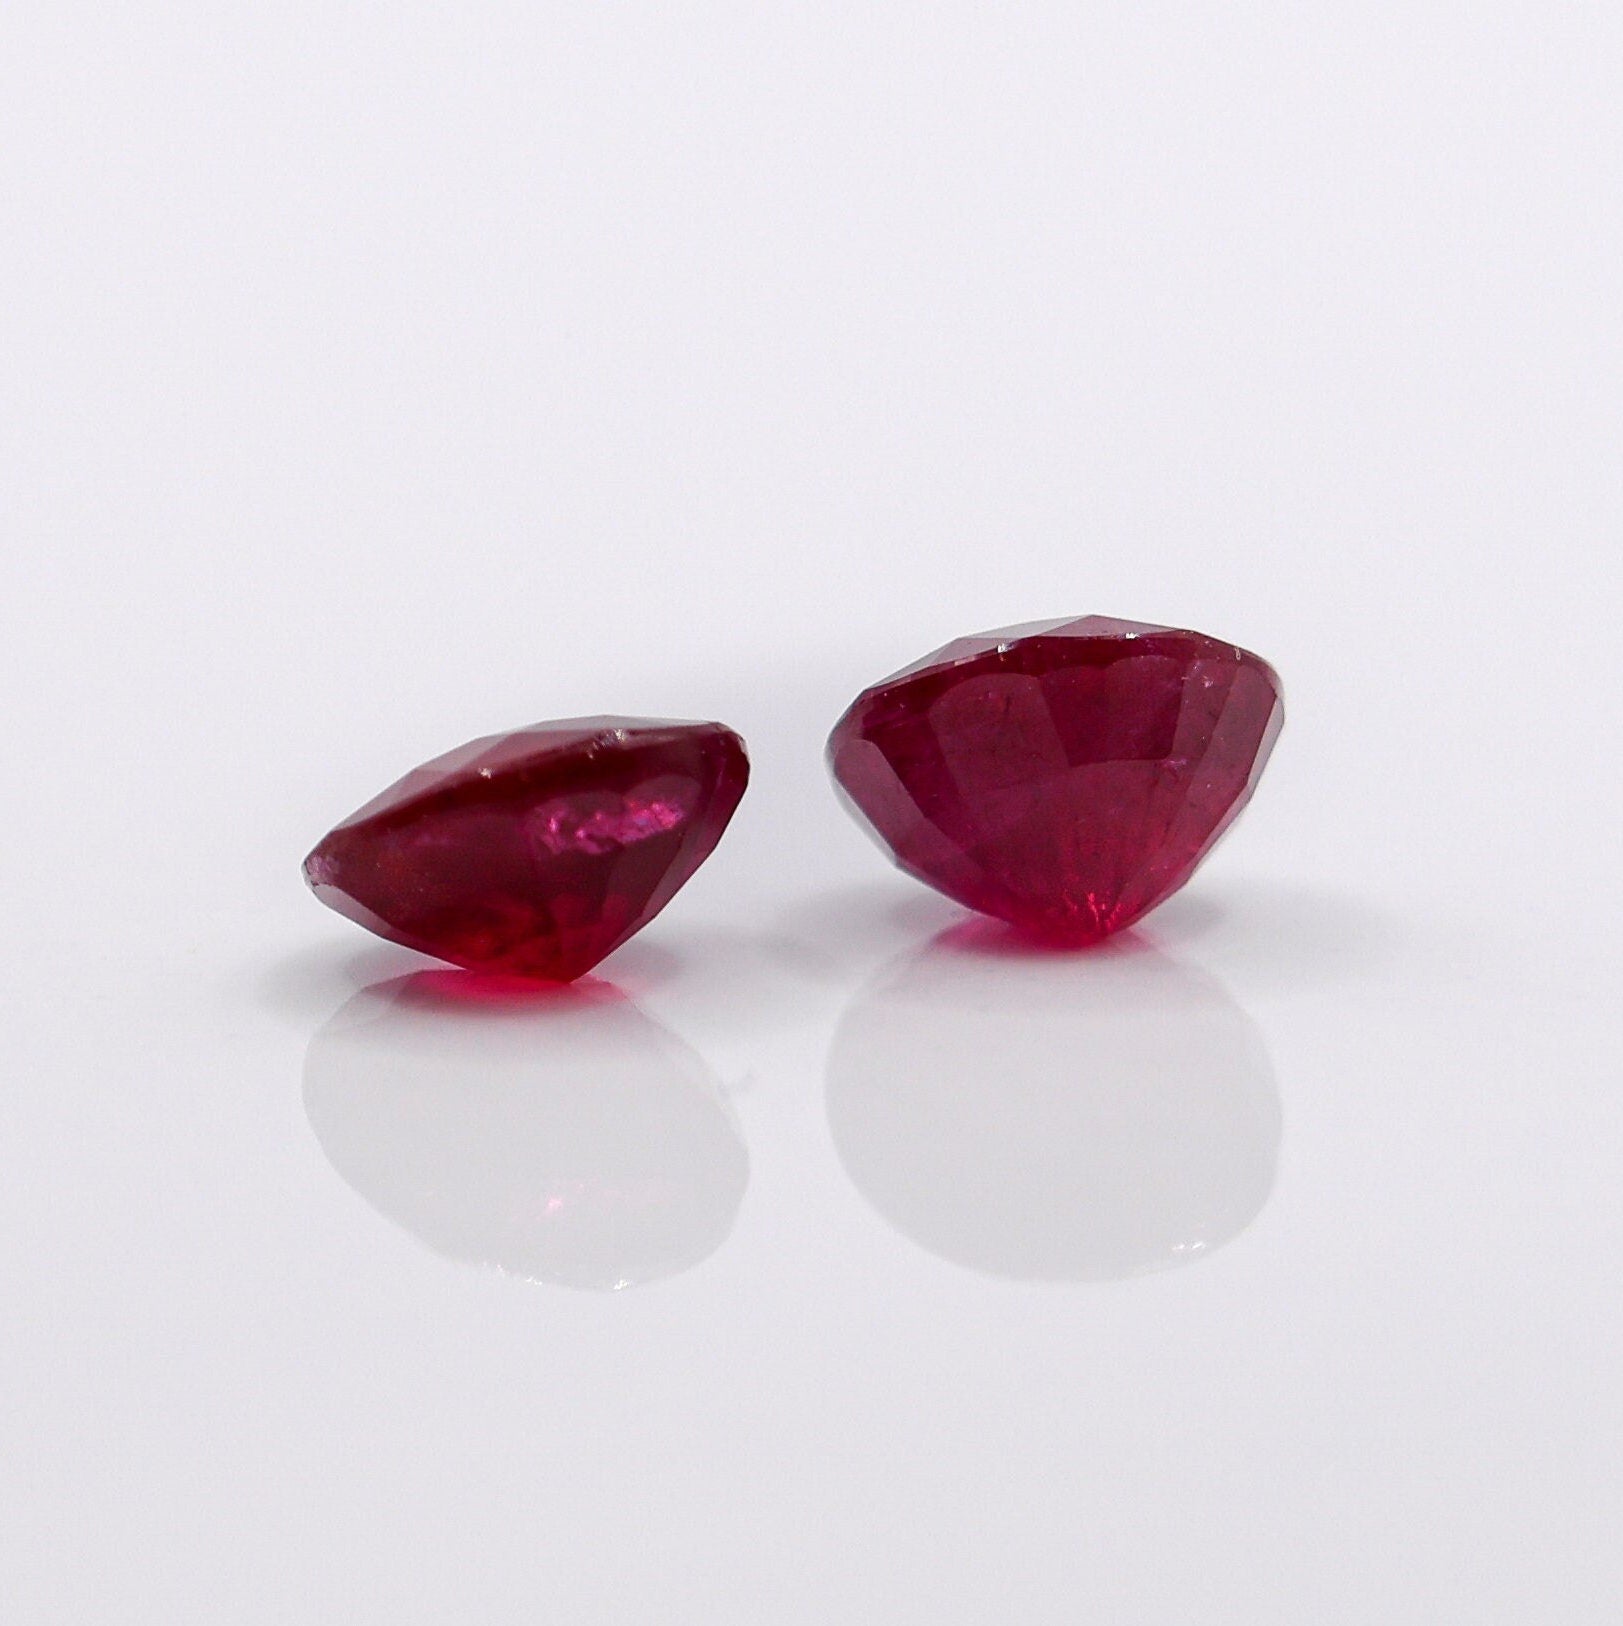 Gemstones-Natural Red Ruby Loose Gemstones || Round 5mm || Pigeon Blood Red || Jewelry Setting || Fissure Filled || Certified || - NNJGemstones